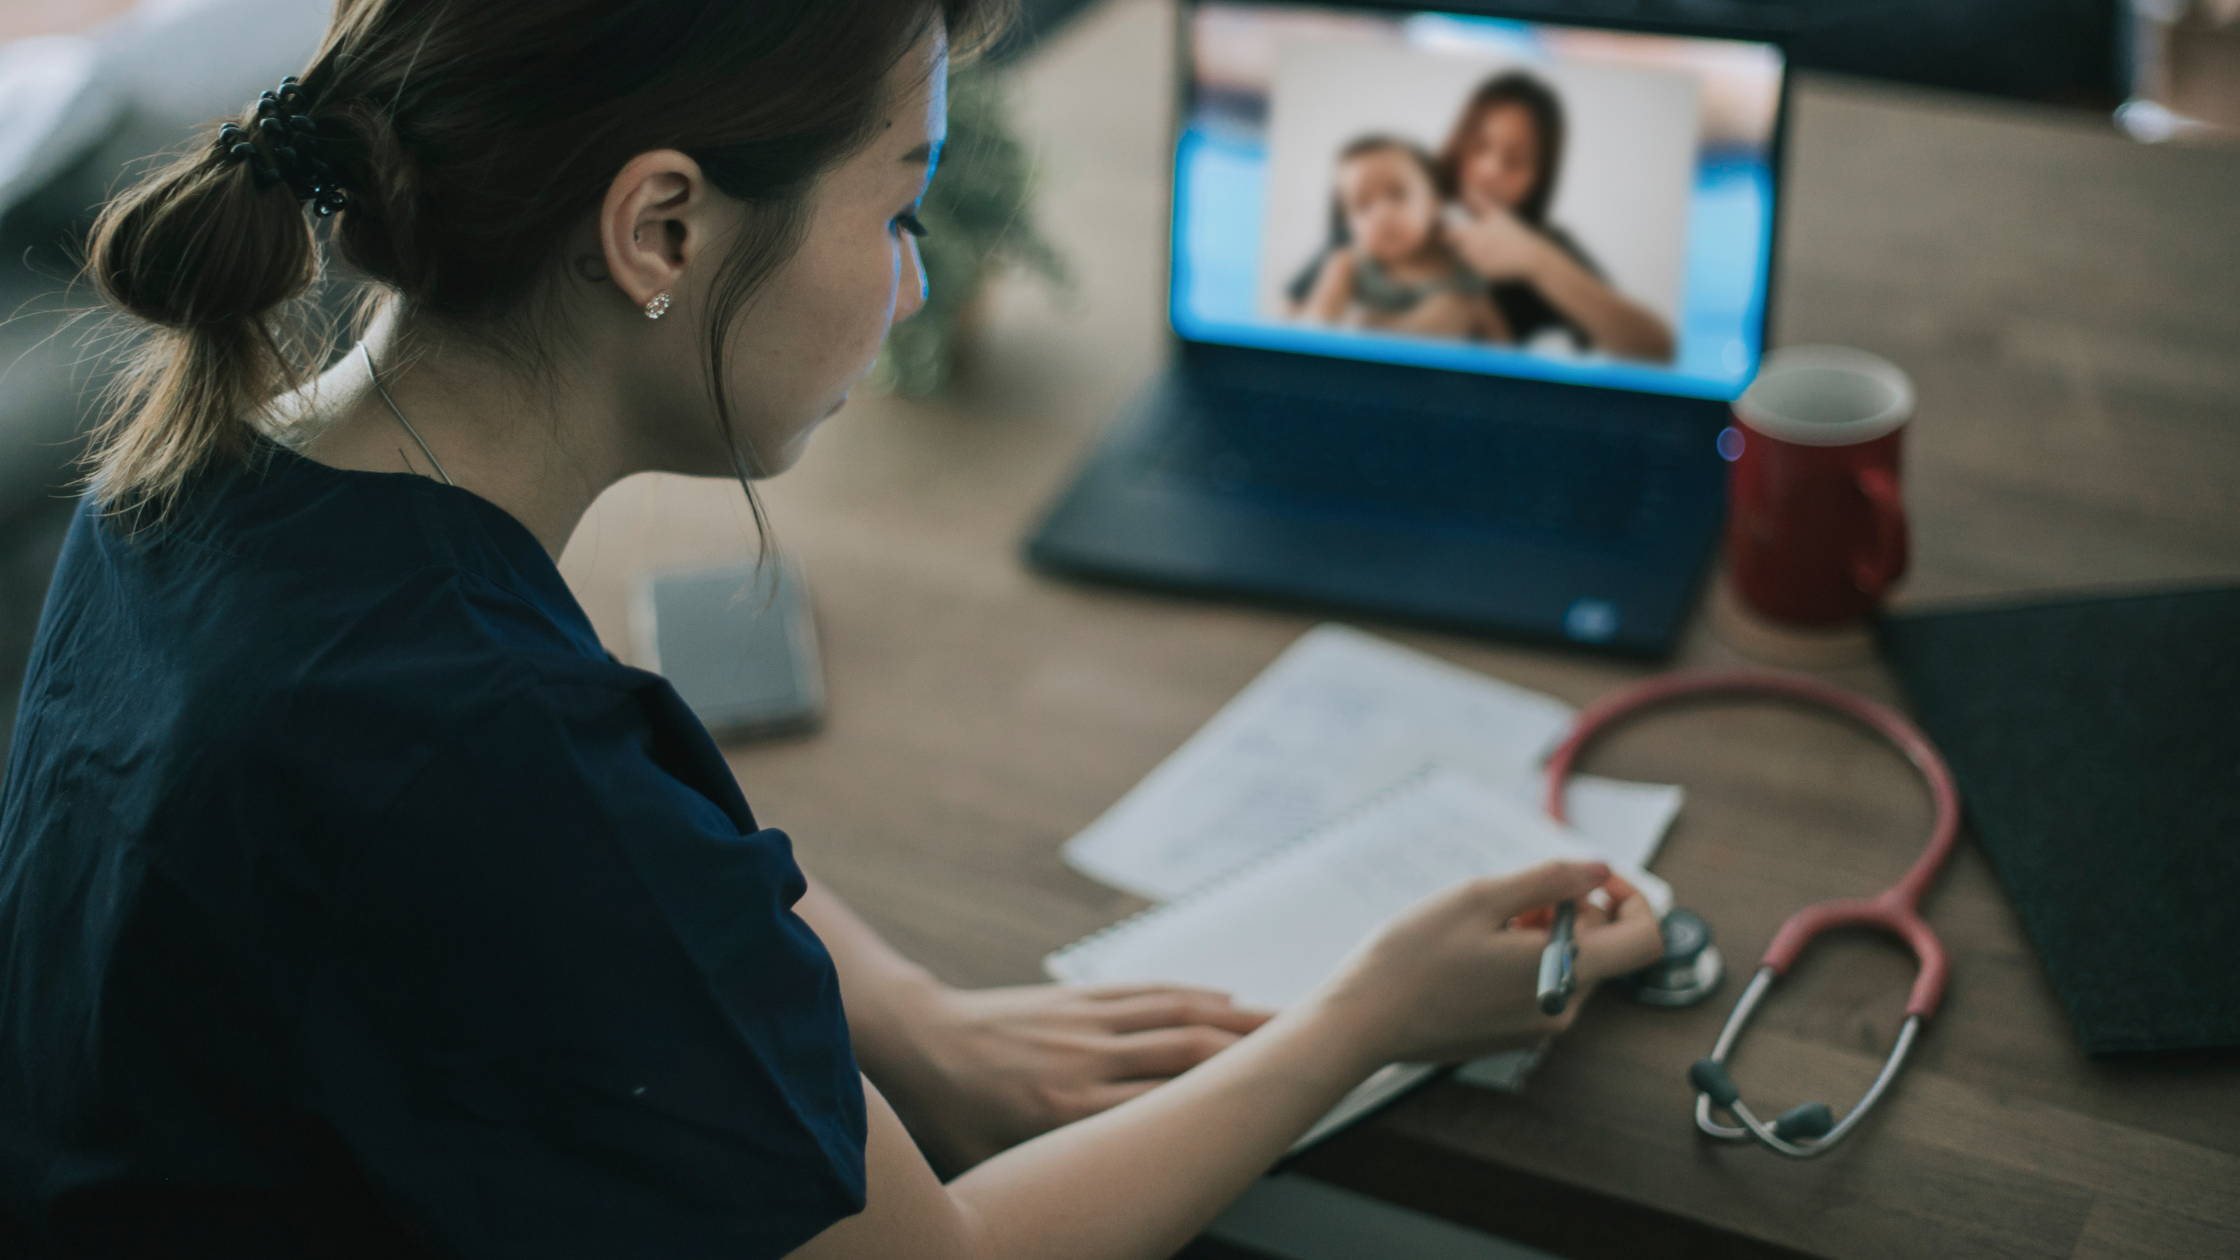 Telehealth in 2021: We Have Come a Long Way